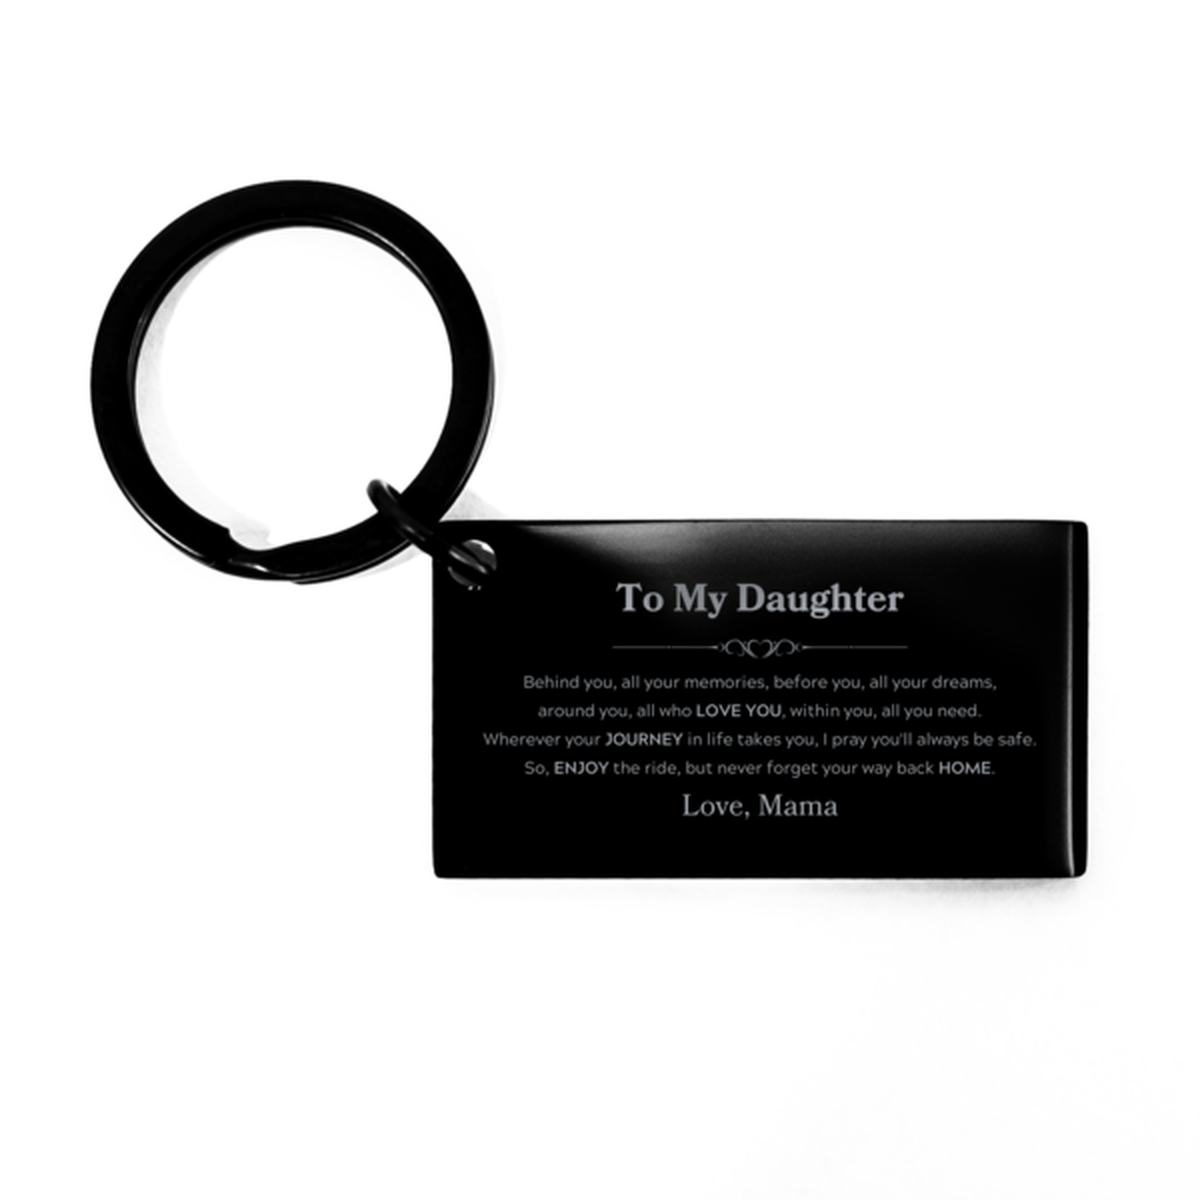 To My Daughter Graduation Gifts from Mama, Daughter Keychain Christmas Birthday Gifts for Daughter Behind you, all your memories, before you, all your dreams. Love, Mama